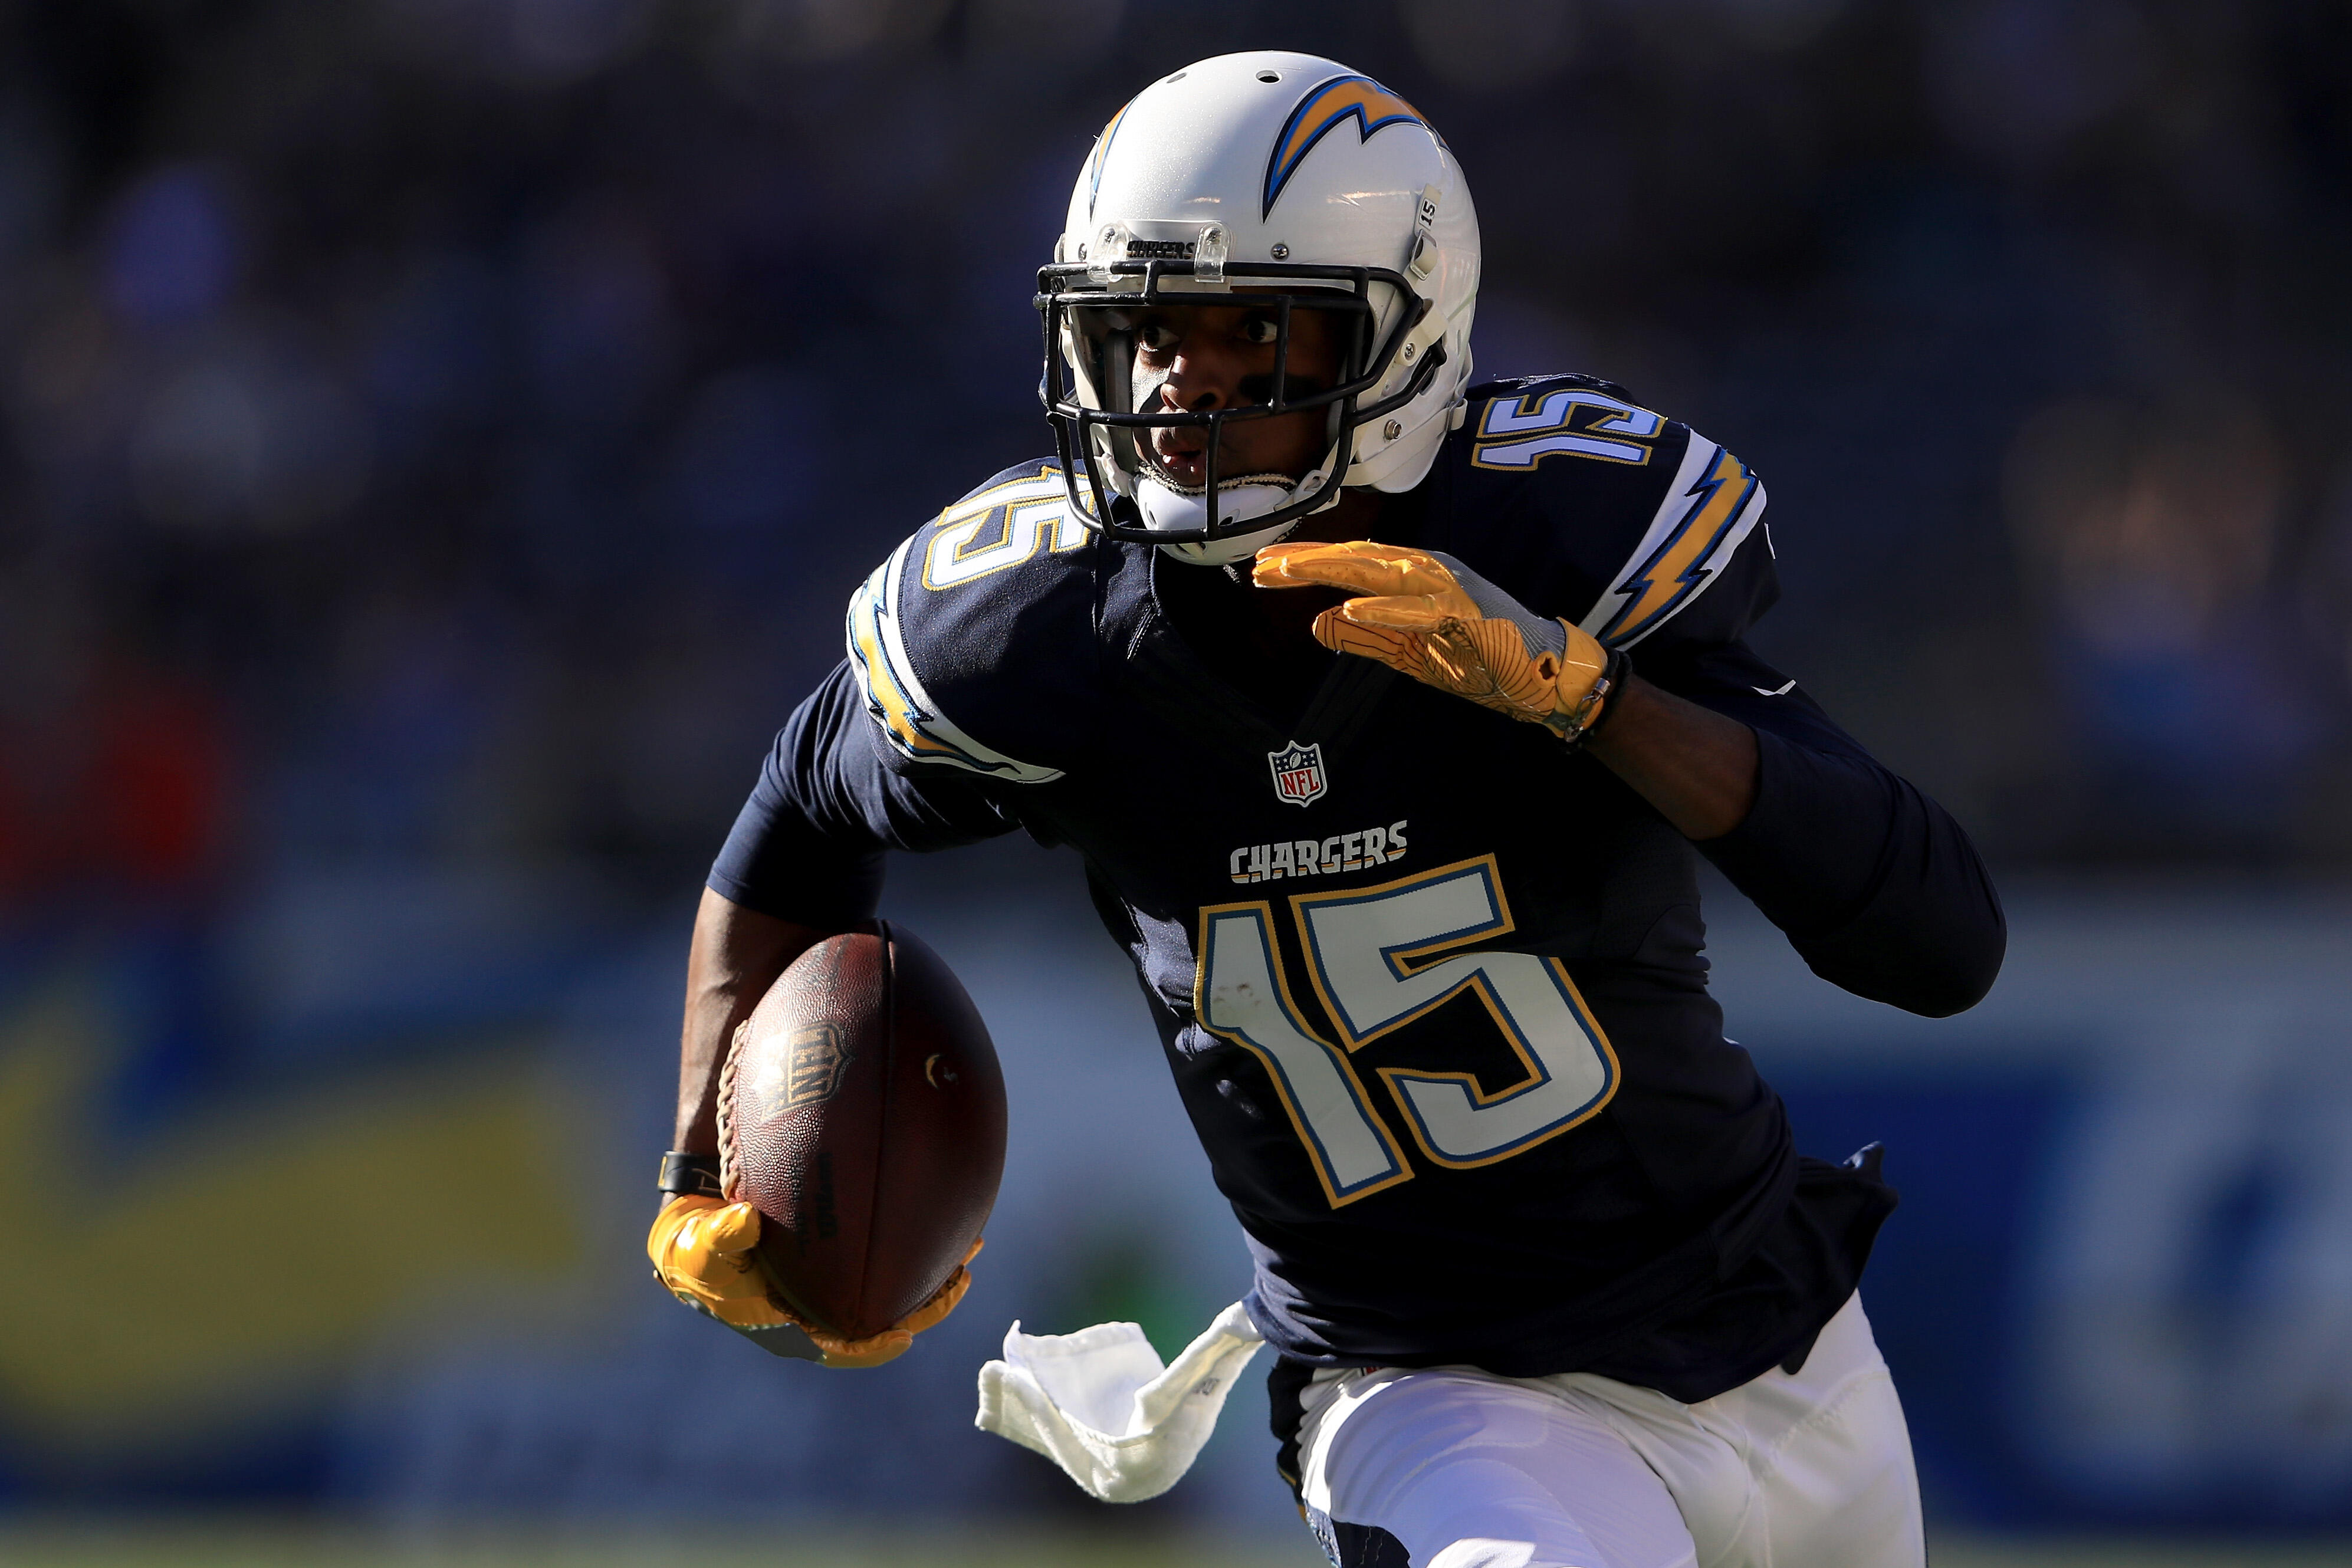 SAN DIEGO, CA - DECEMBER 04:  Dontrelle Inman #15 of the San Diego Chargers runs against the Tampa Bay Buccaneers during the first half at Qualcomm Stadium on December 4, 2016 in San Diego, California.  (Photo by Sean M. Haffey/Getty Images)